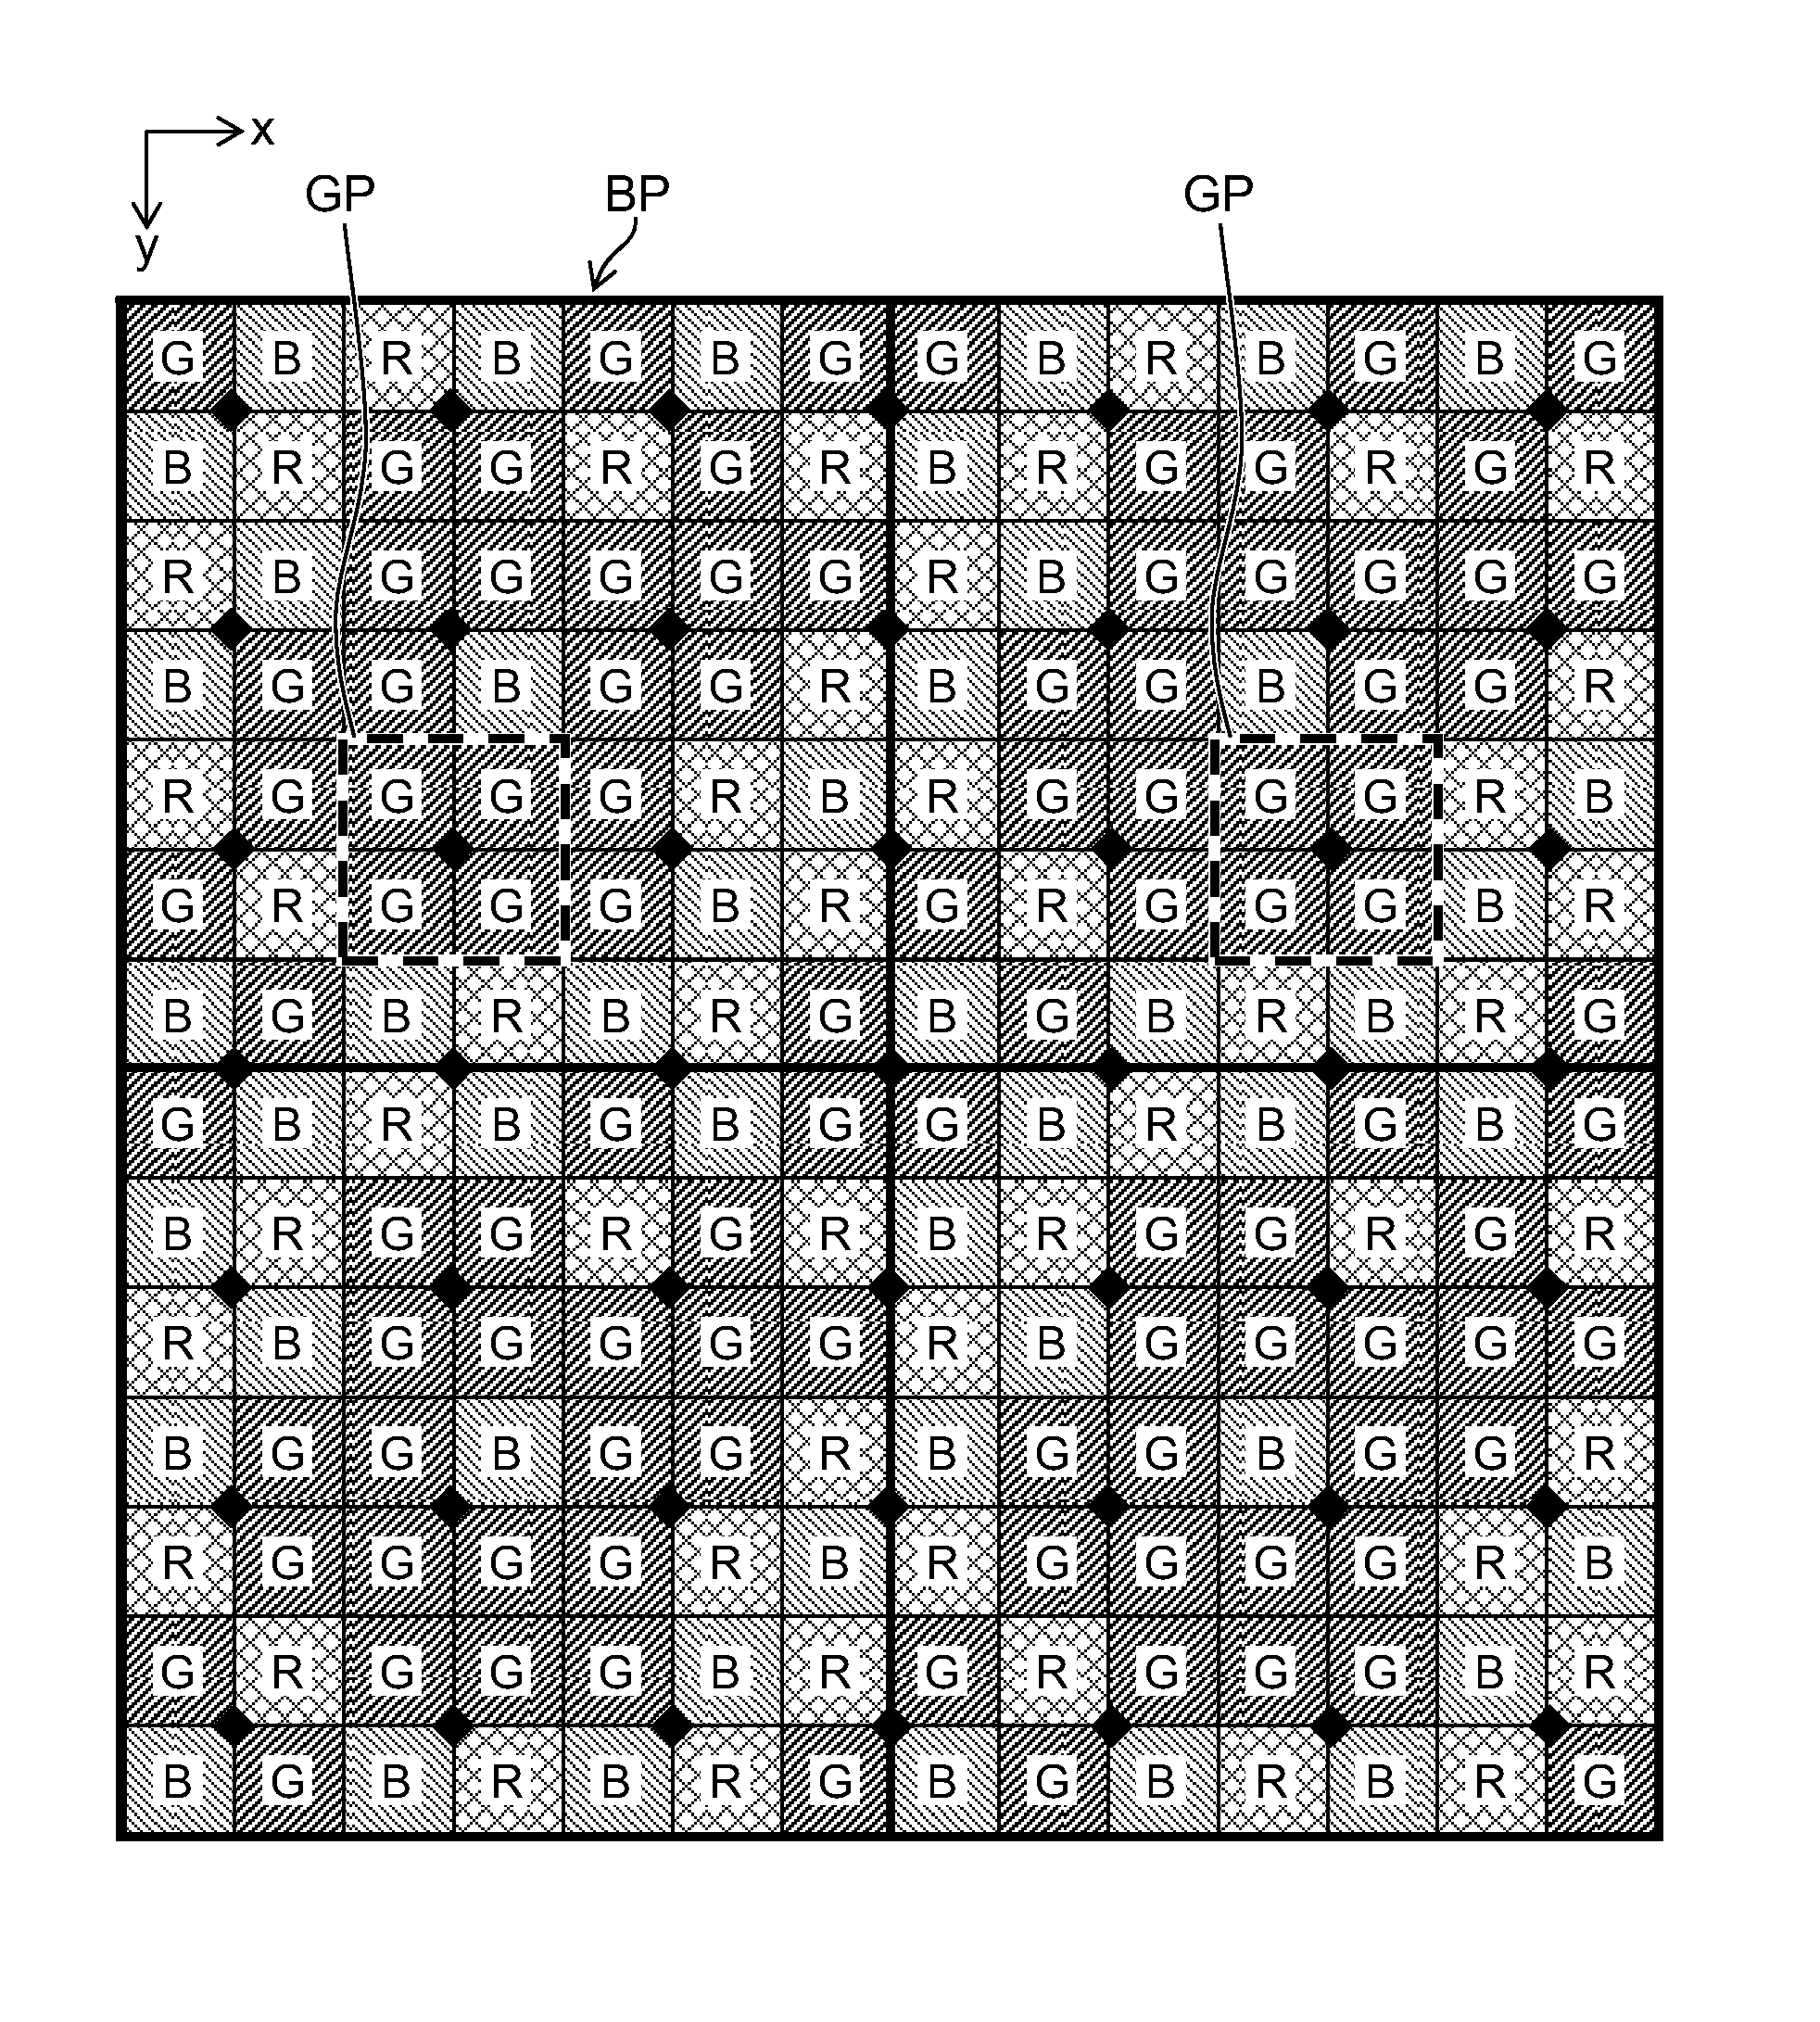 Image pickup apparatus, image pickup element, and method for correcting sensitivity difference